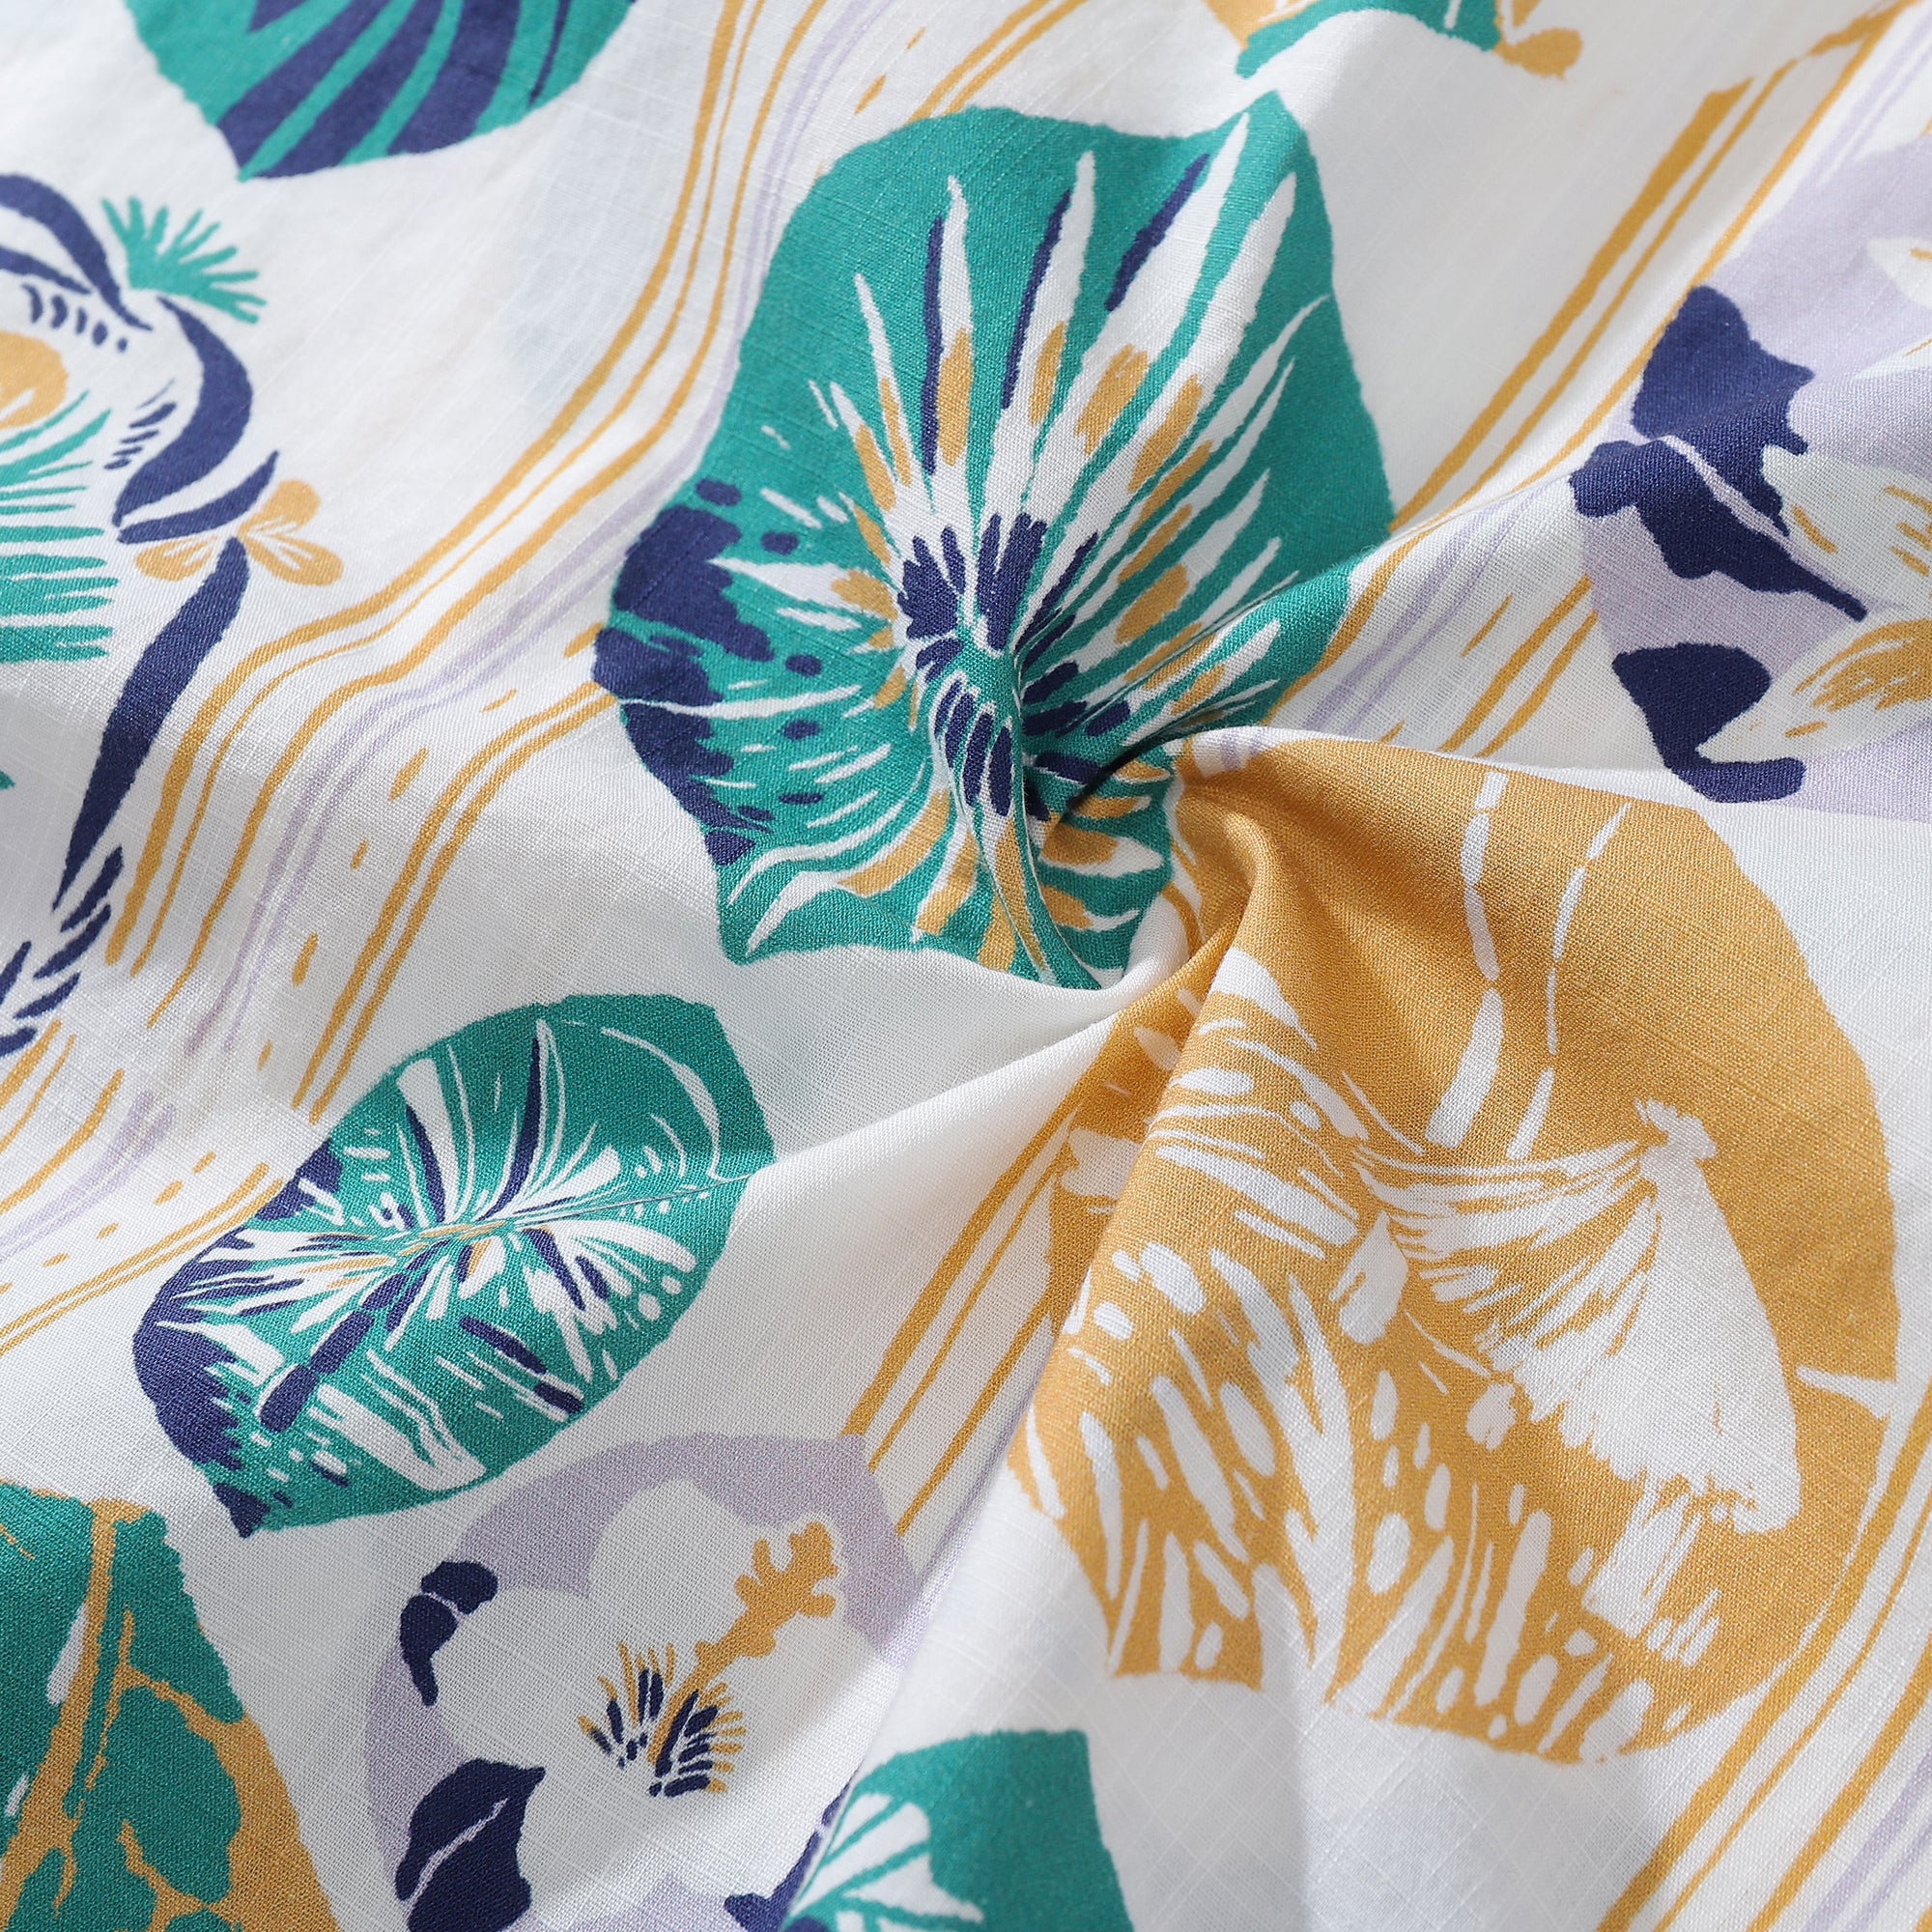 Striped Base Fabric with Vintage Tropical Flower Print Short-Sleeved Hawaiian Shirt